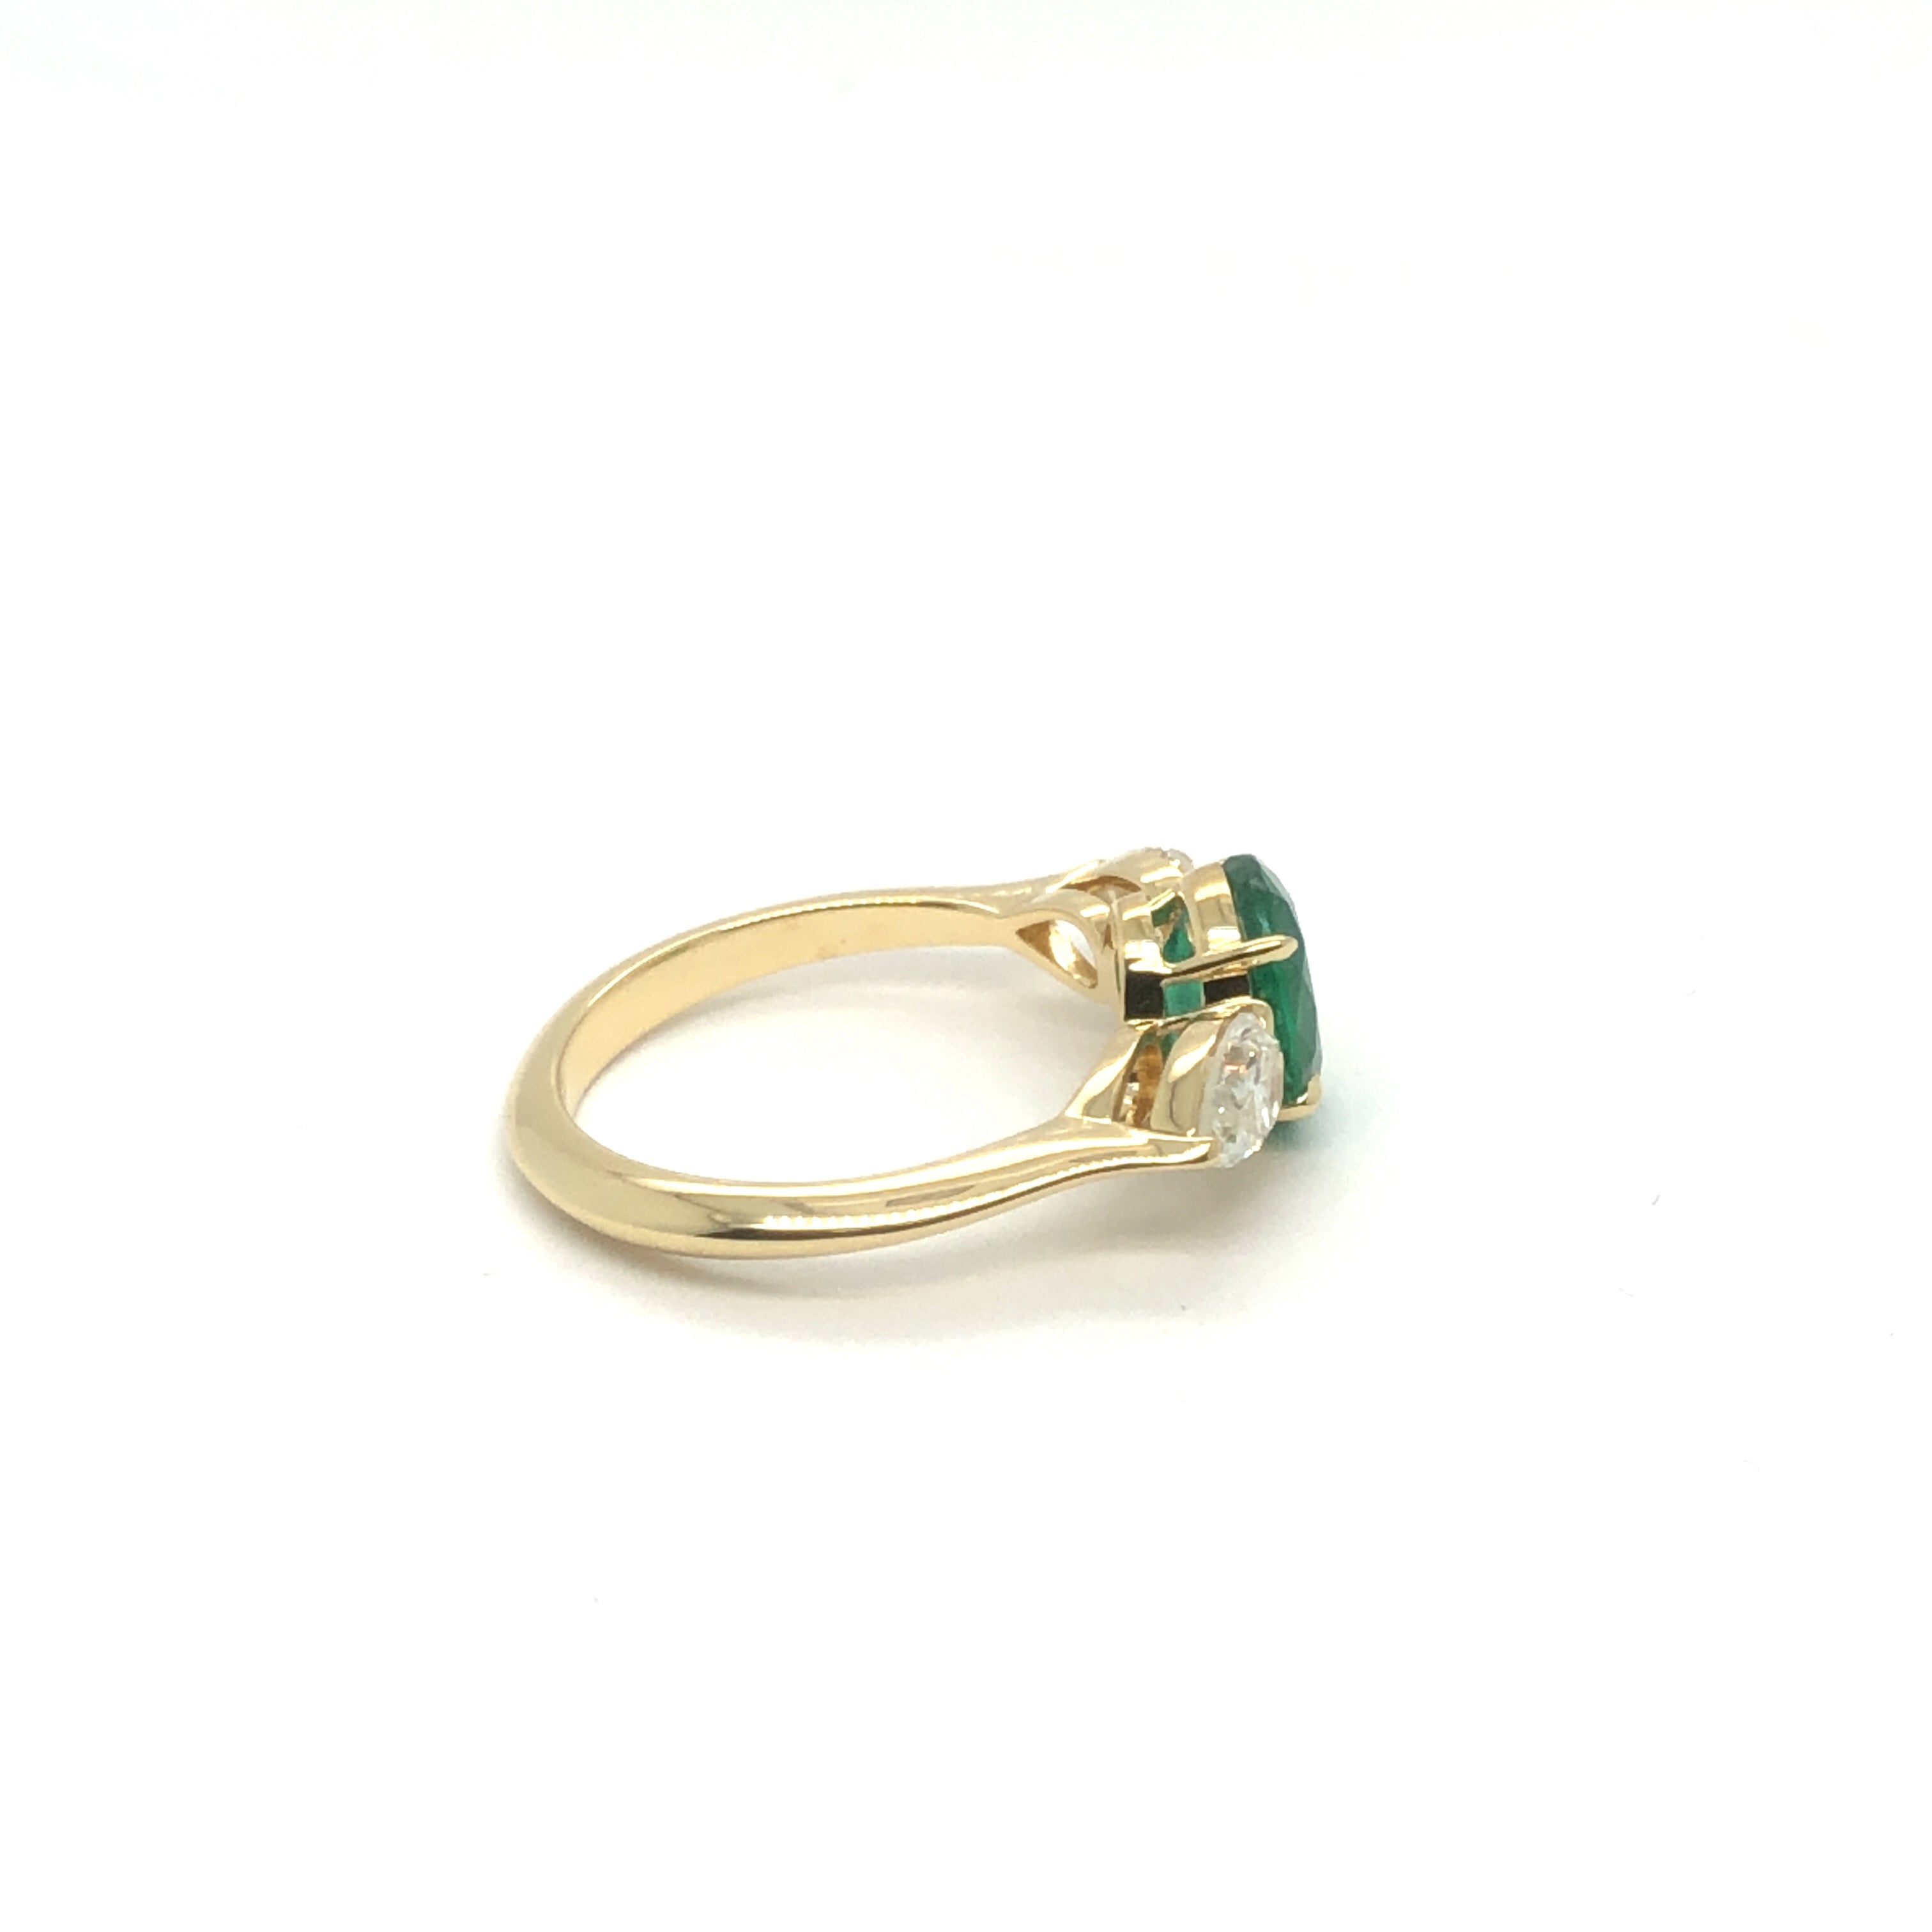 Sofia Alternative Engagement Ring with Emerald and Diamonds